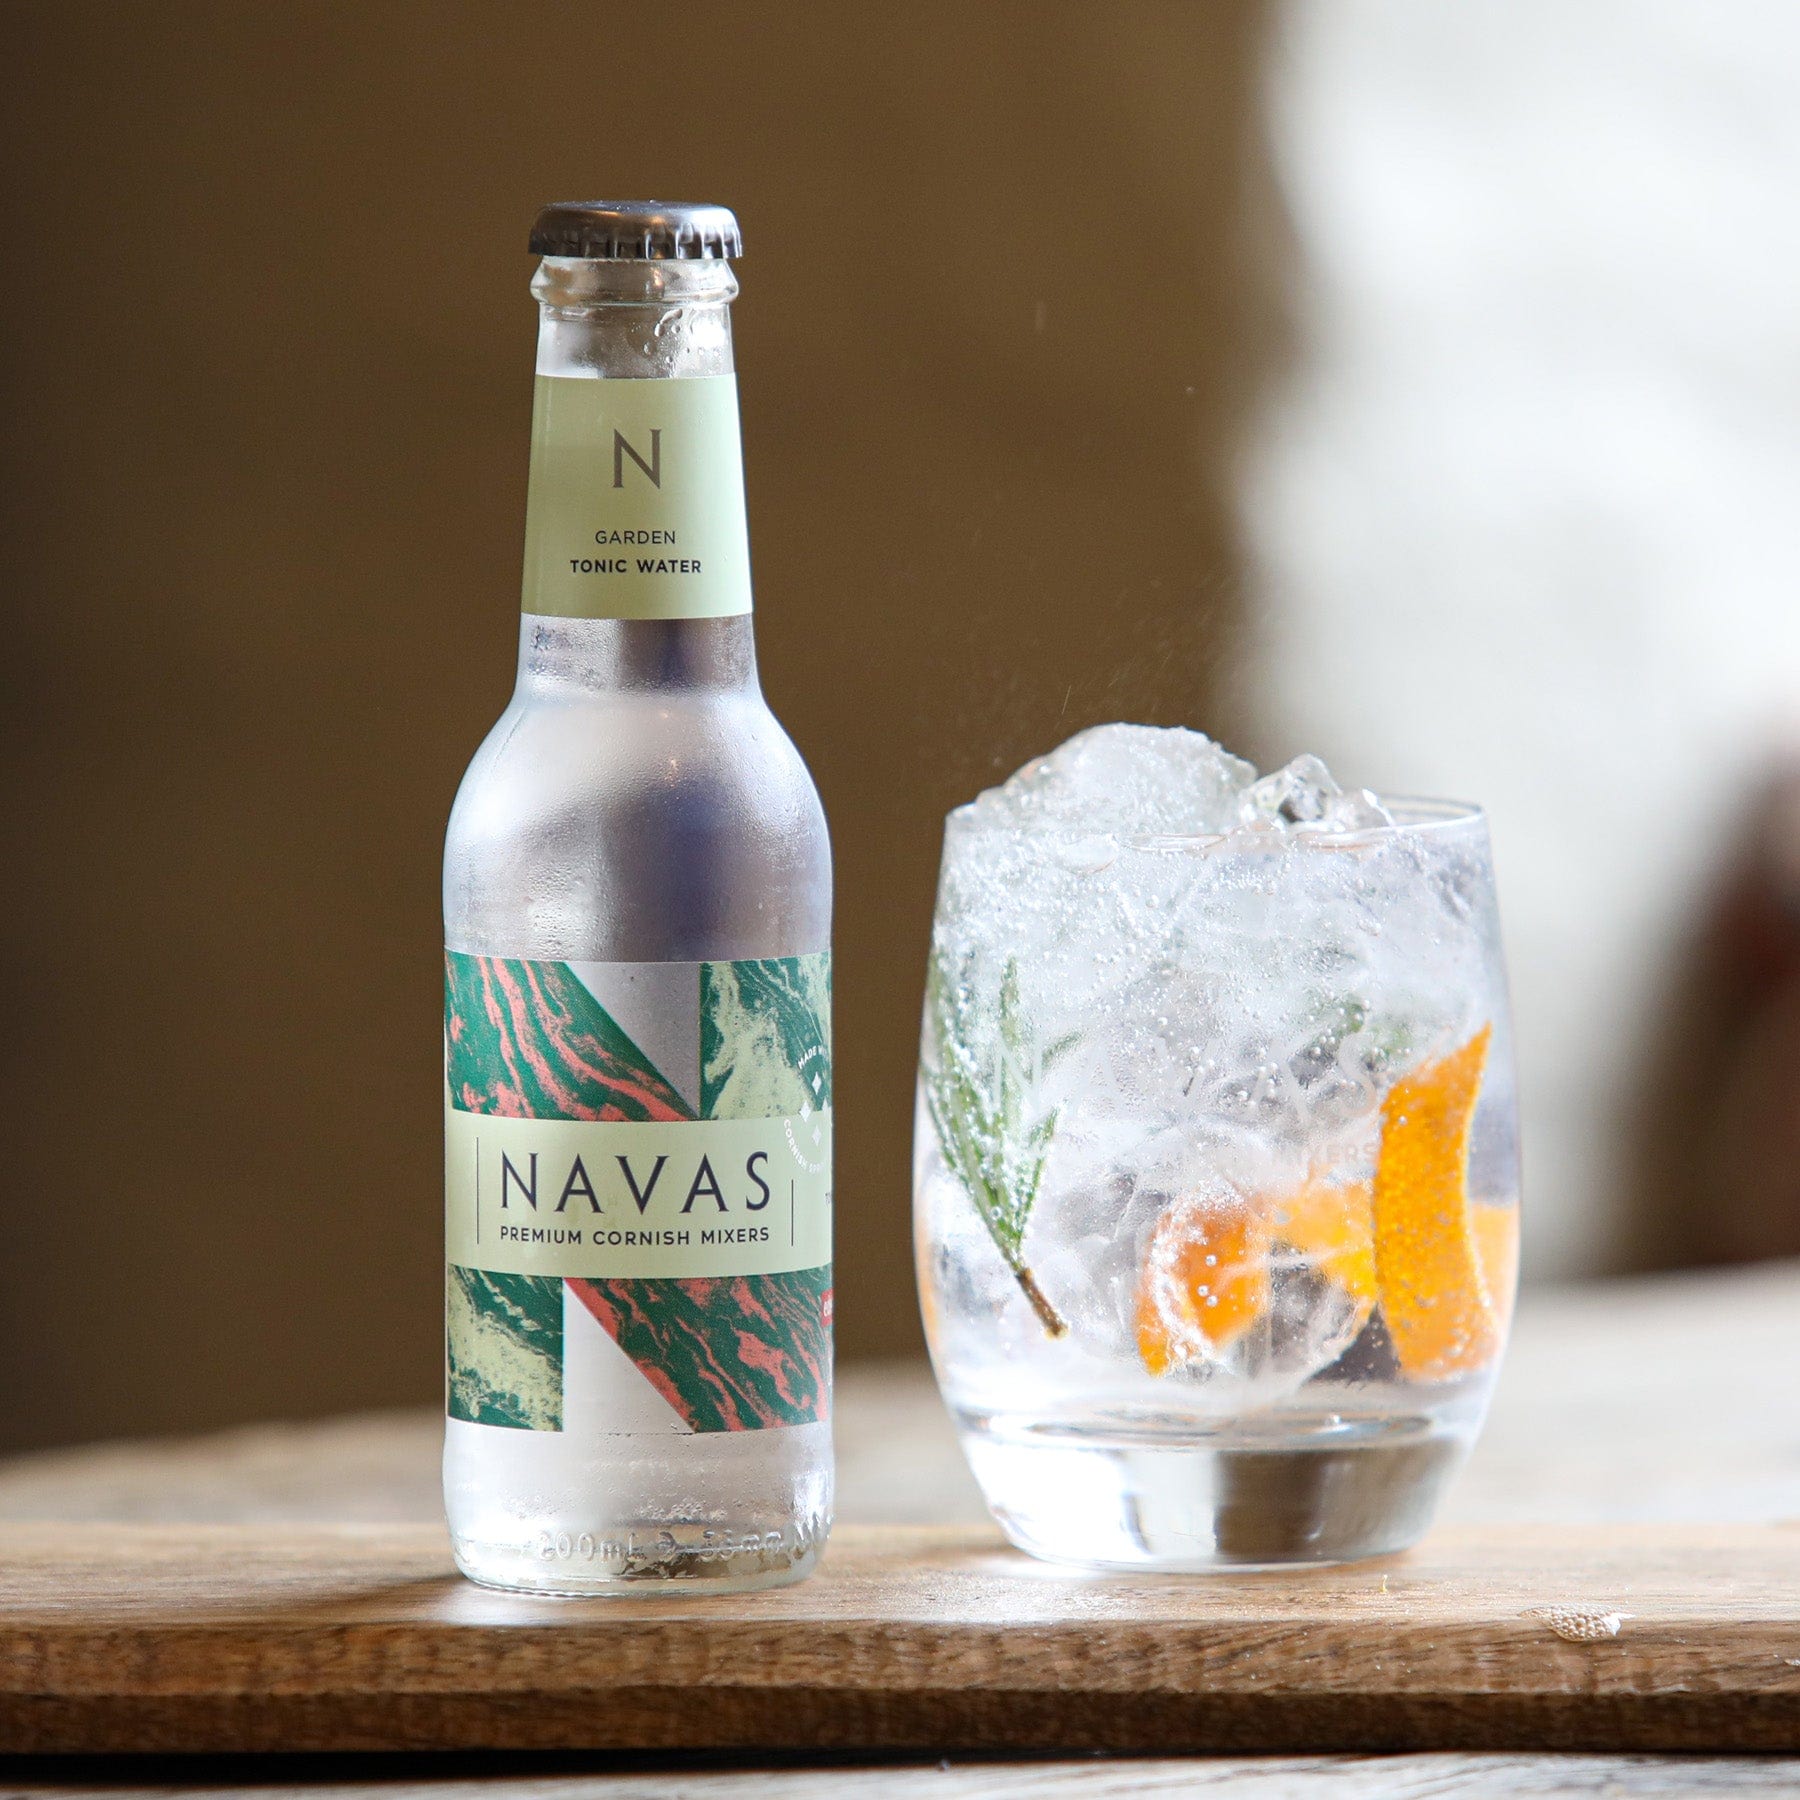 Navas Garden Tonic Water bottle beside glass with ice cubes and citrus garnish on wooden surface